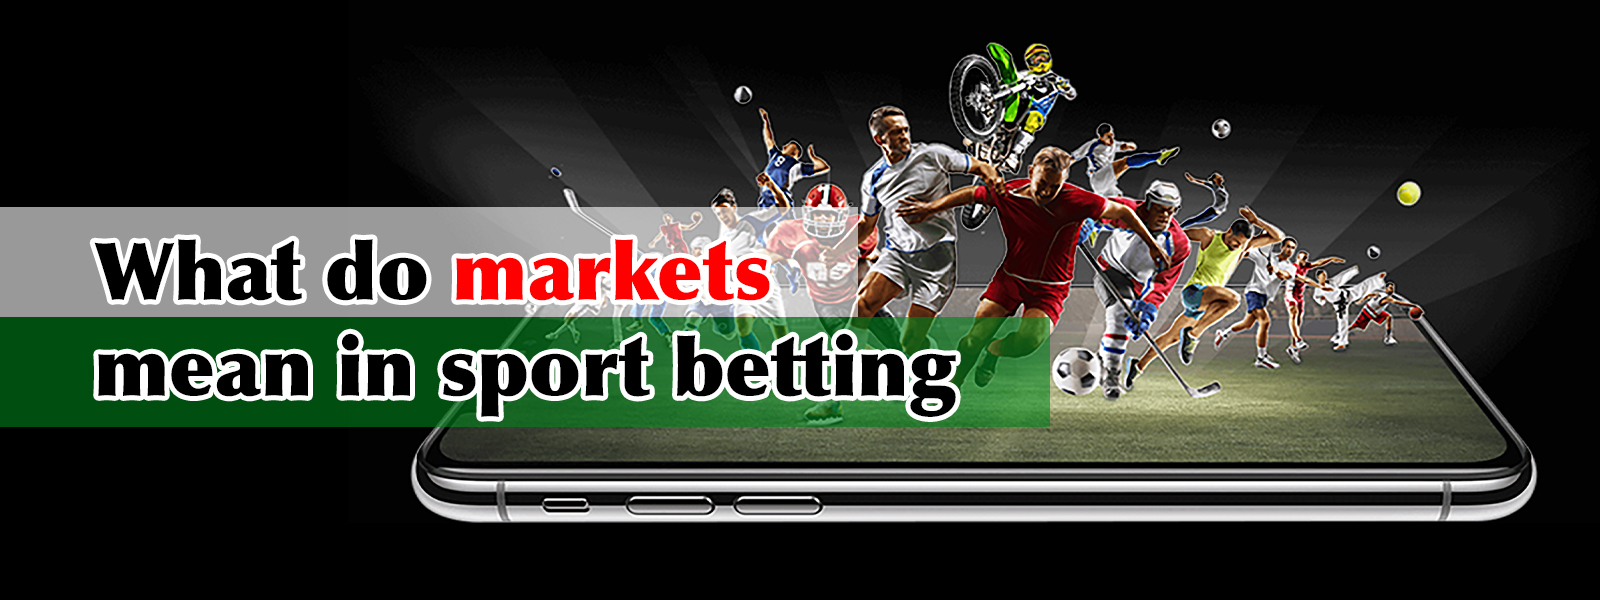 Markets In Sports Betting